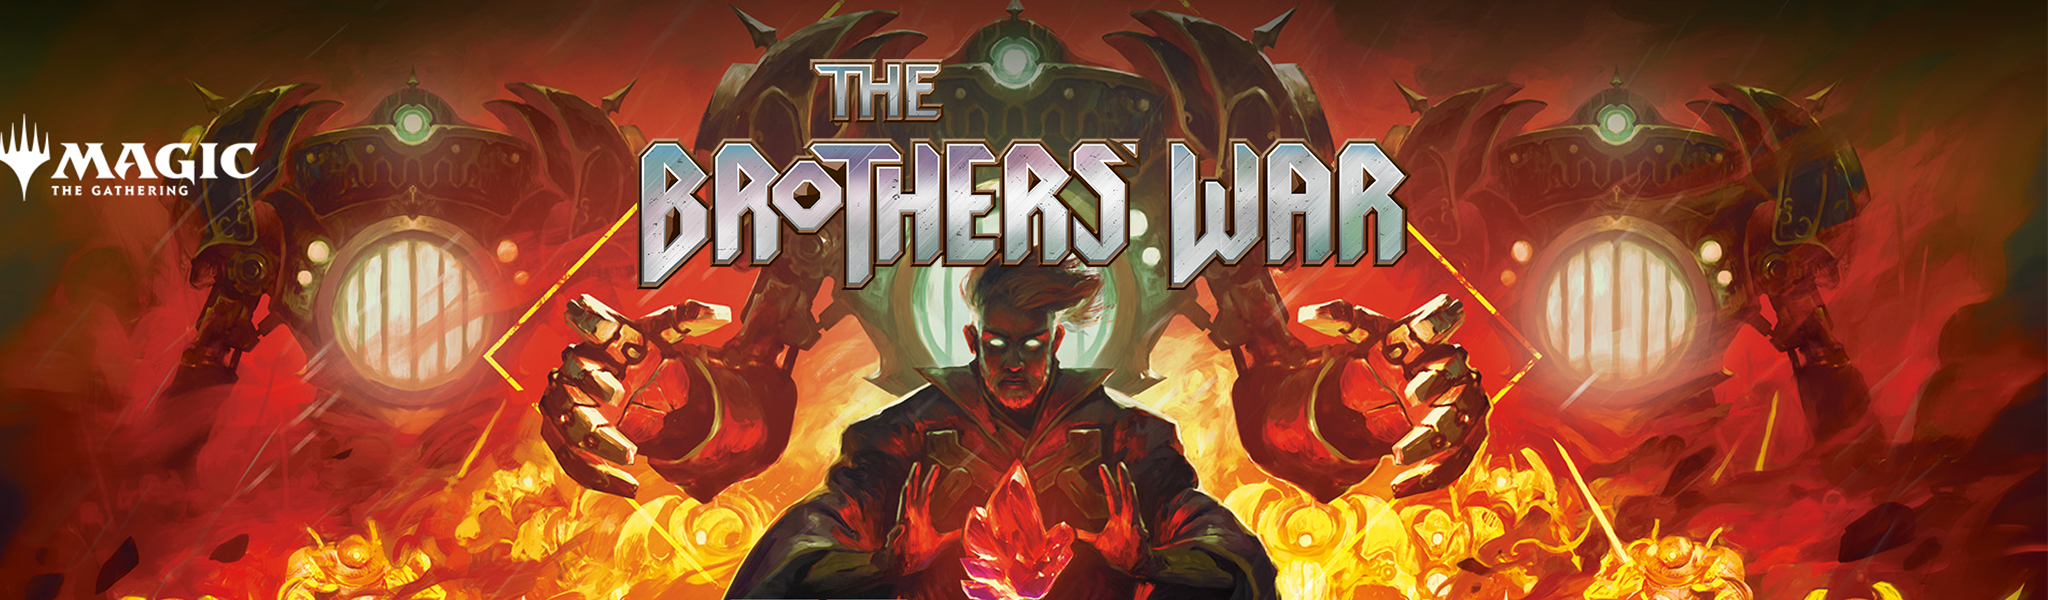 Magic: The Gathering, The Brothers' War